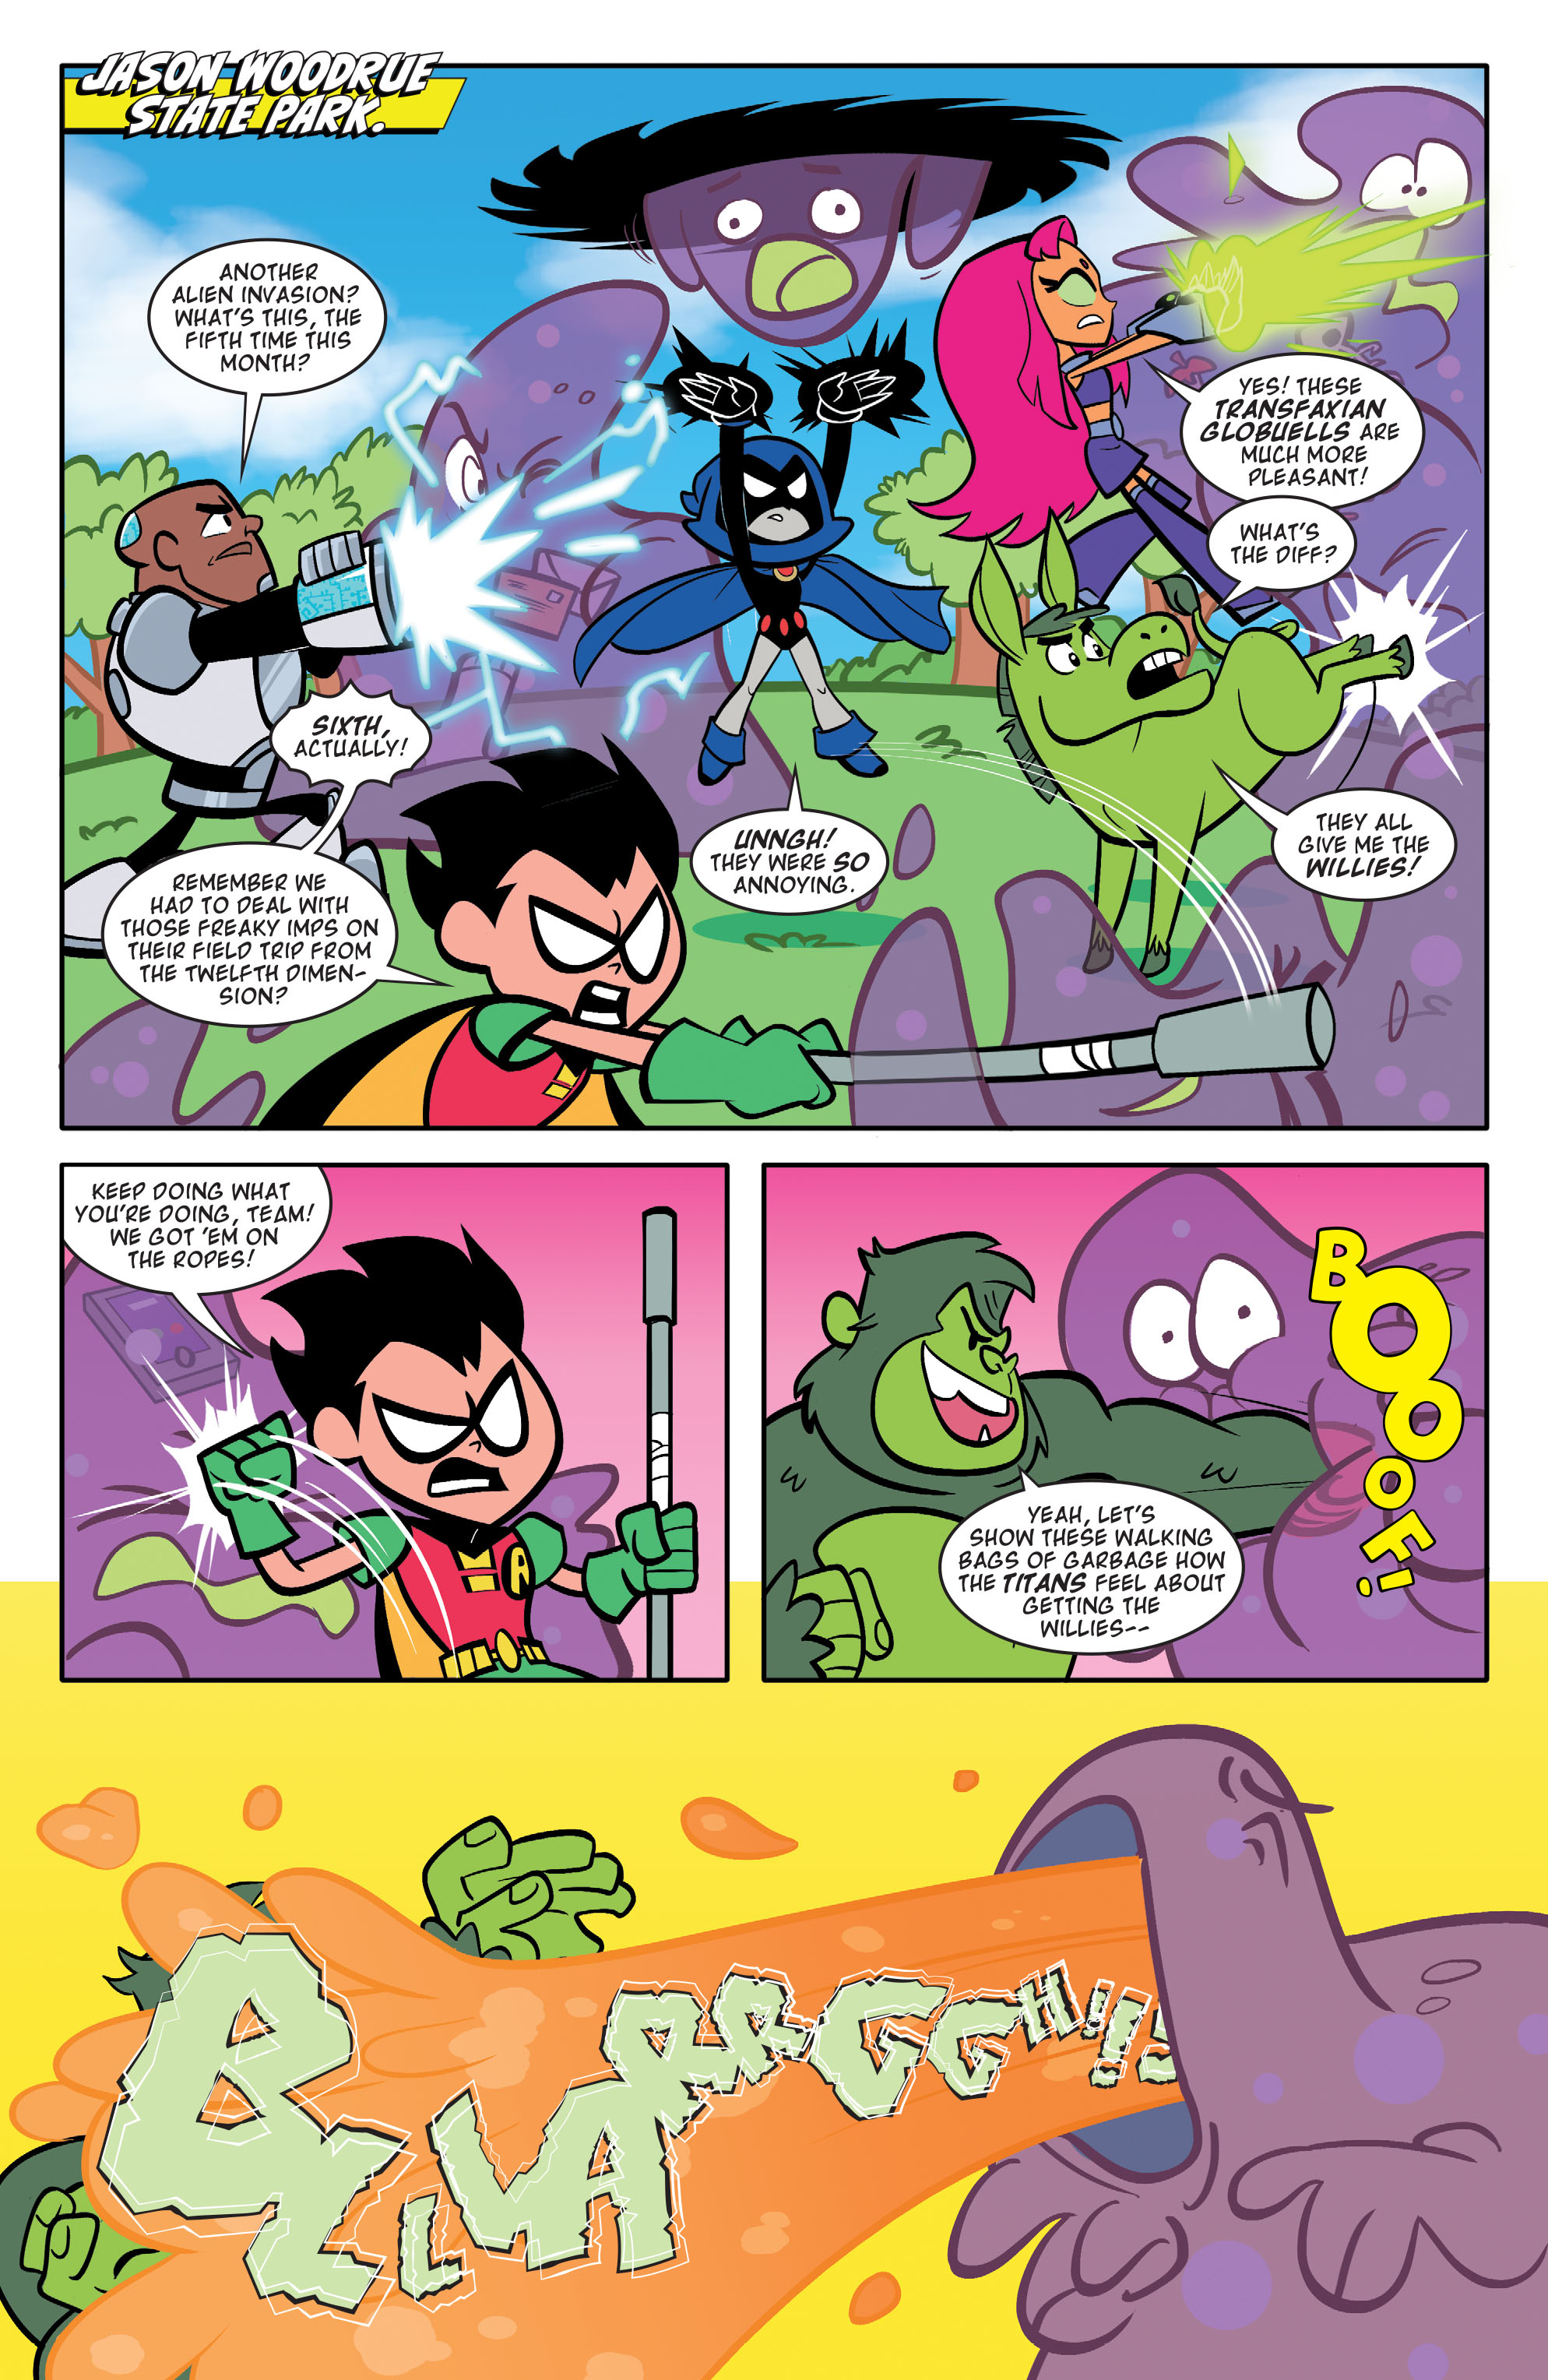 Teen Titans Go!: Booyah! (2020-): Chapter 3 - Page 2